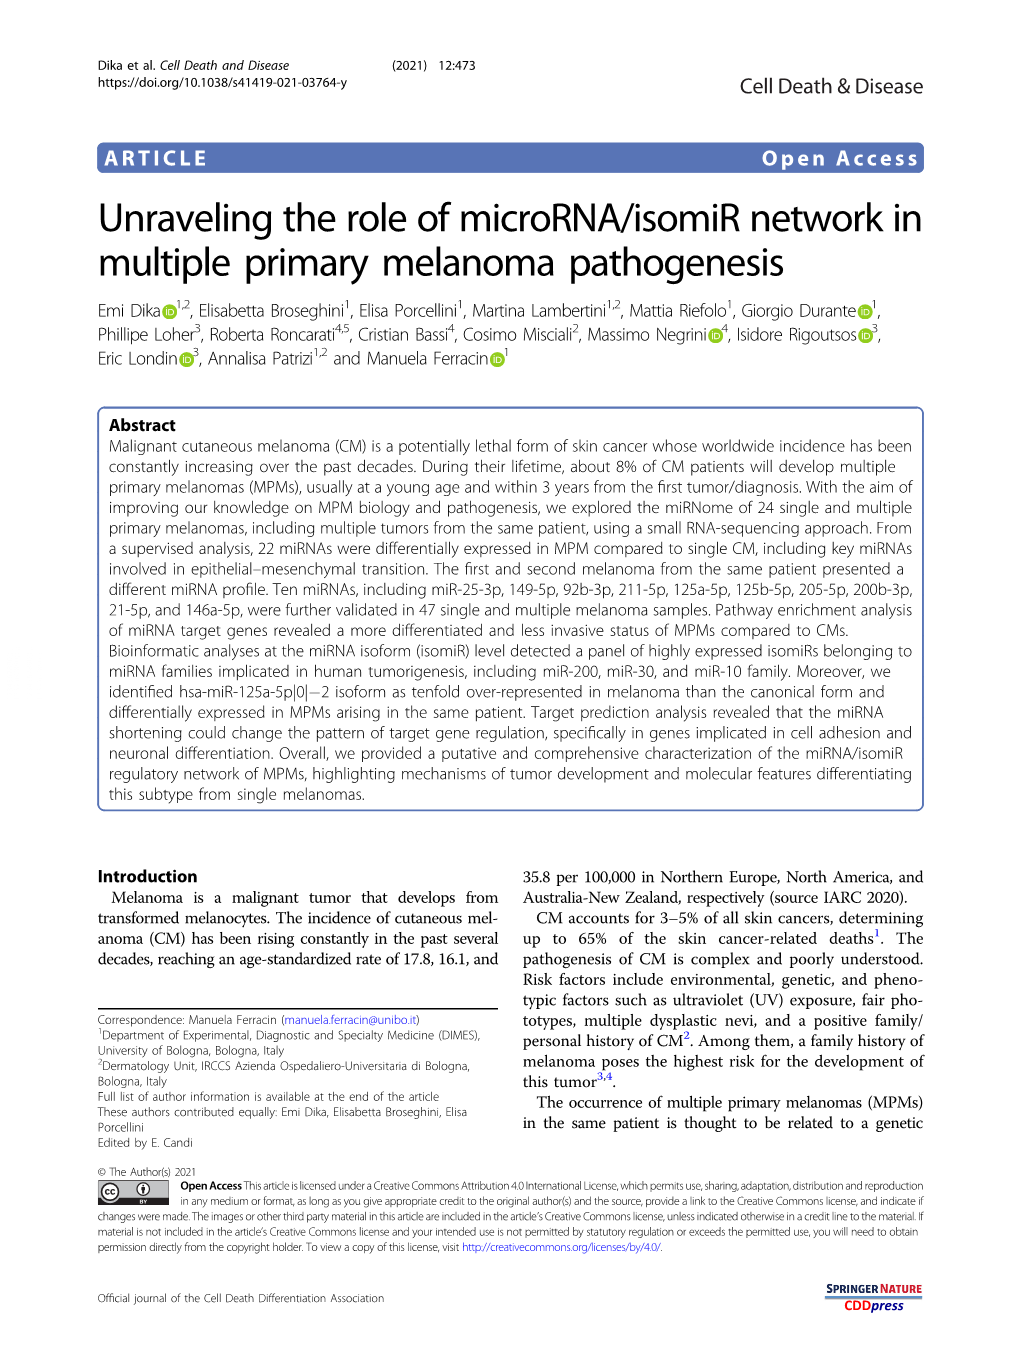 Unraveling the Role of Microrna/Isomir Network In